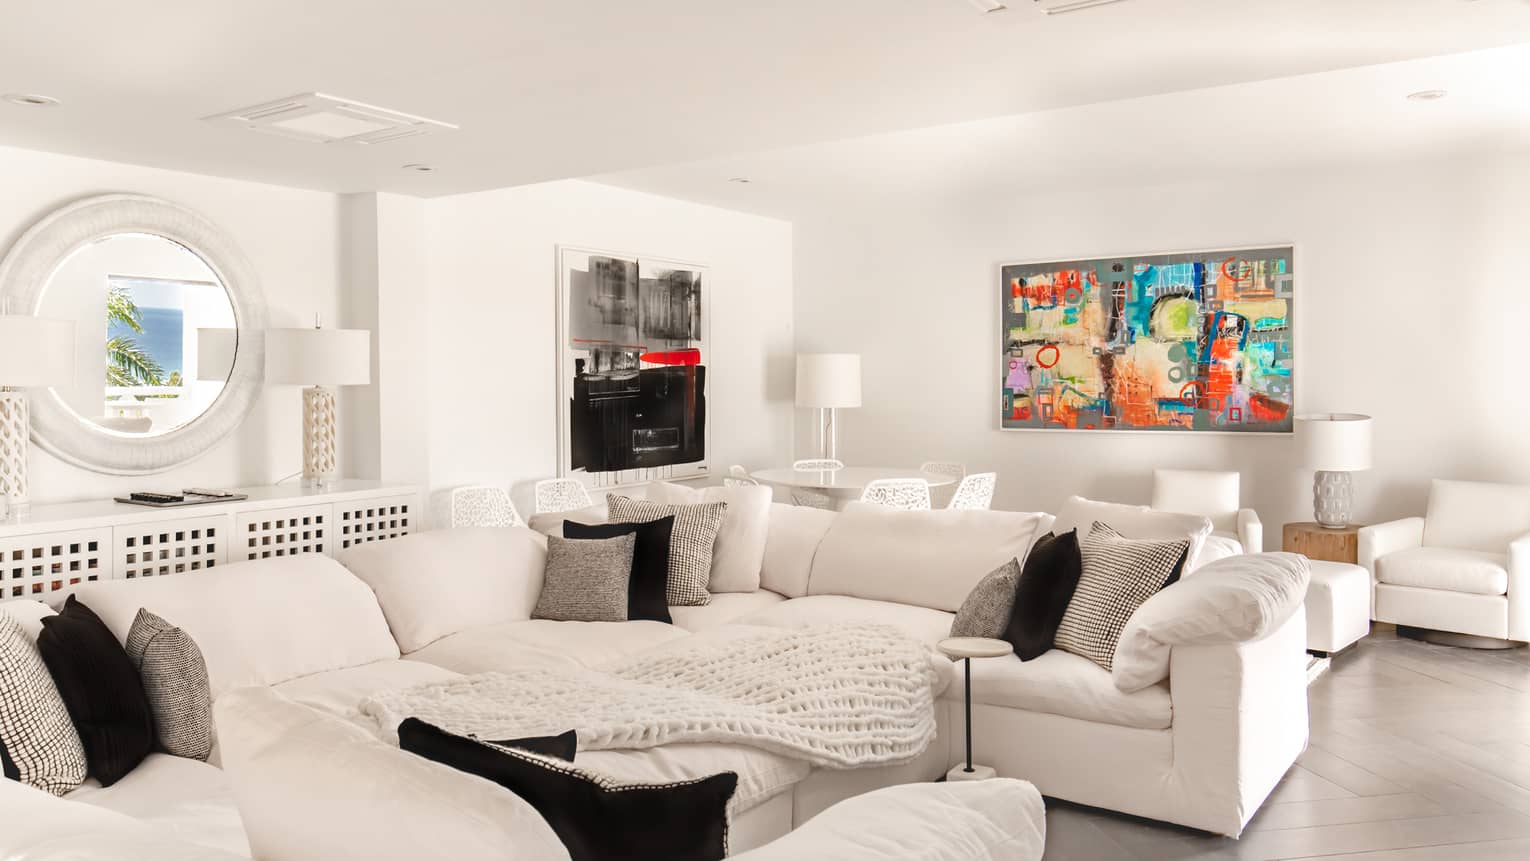 Living room with large u-shape white sofa and colorful artwork on the white walls